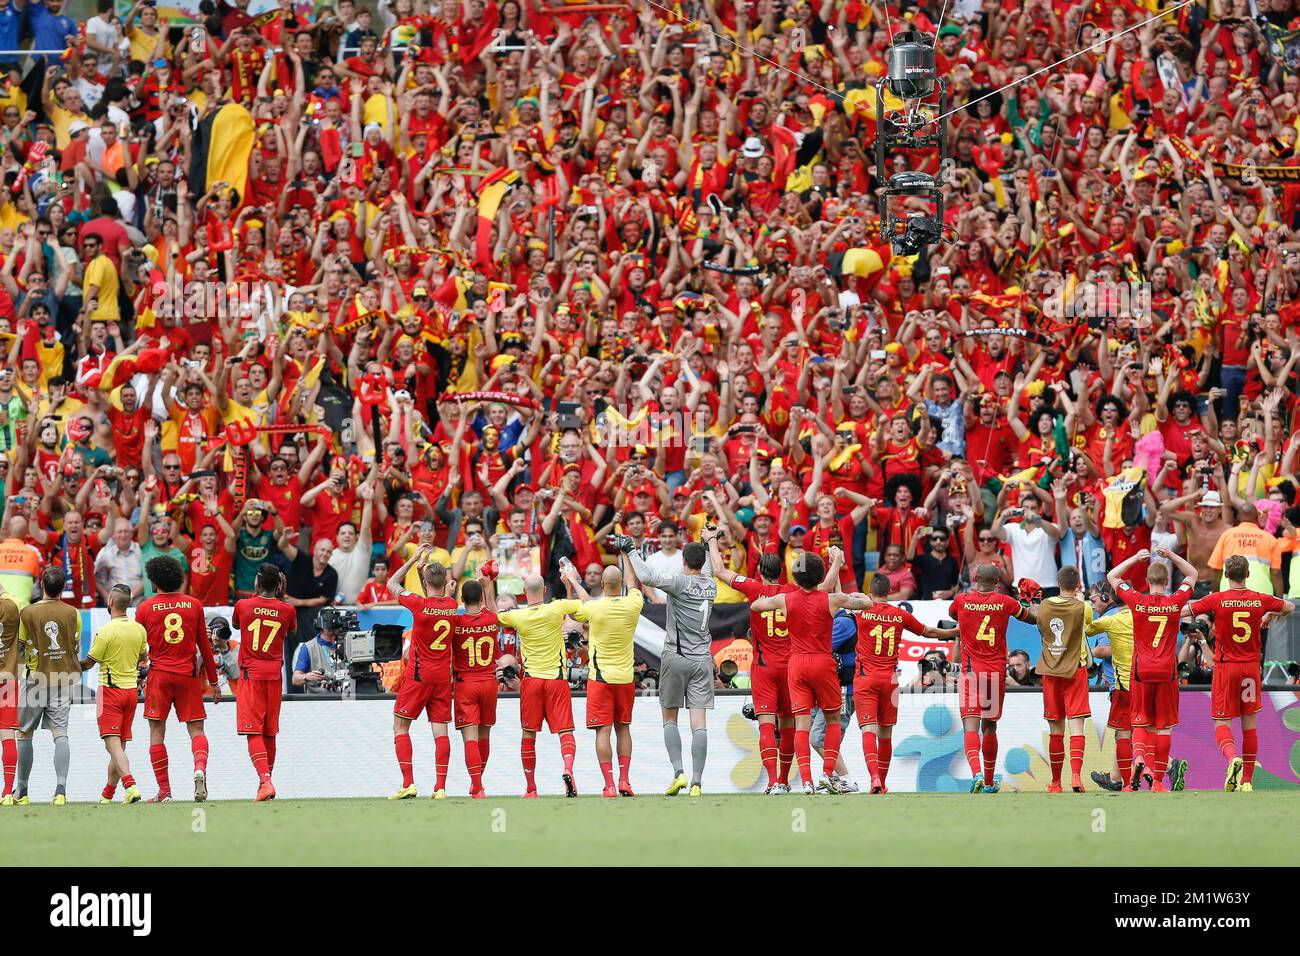 20140622 - RIO DE JANEIRO, BRAZIL: Belgium's players celebrate with supporters after winning 1-0 a soccer game between Belgian national team The Red Devils and Russia in Rio de Janeiro, Brazil, the second game in Group H of the first round of the 2014 FIFA World Cup, Sunday 22 June 2014.   BELGA PHOTO DIRK WAEM Stock Photo